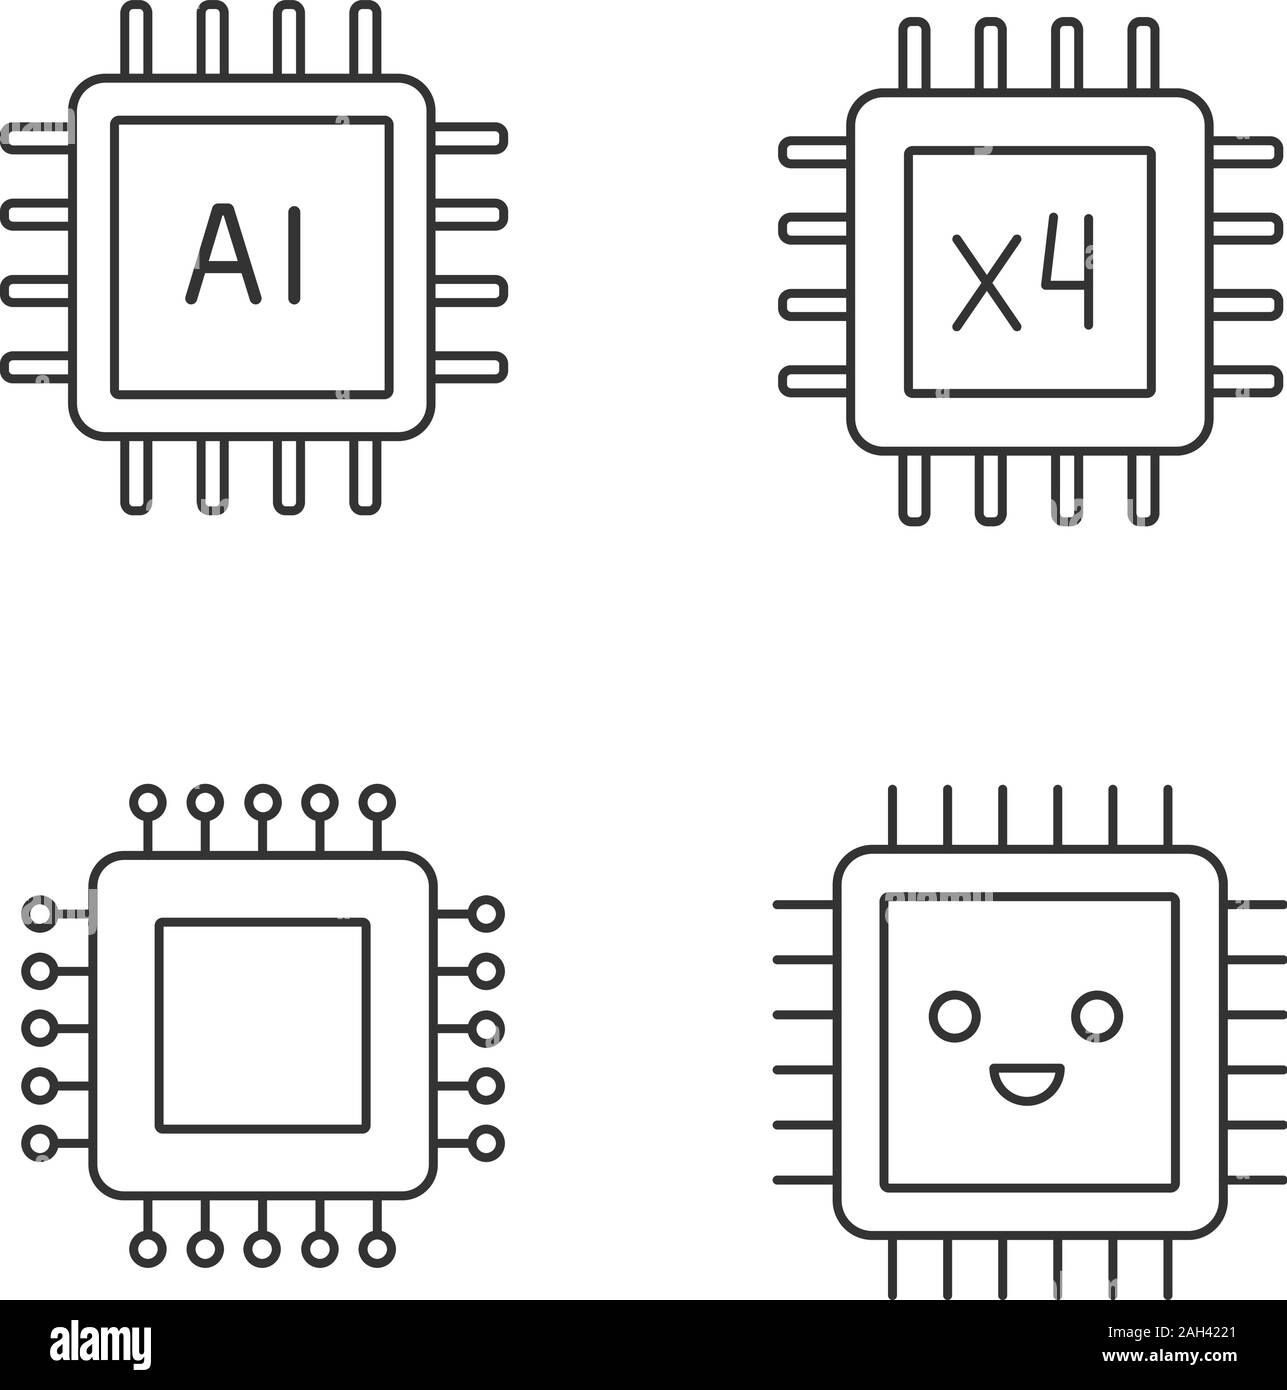 Processors linear icons set. Chip, integrated circuit for ai system, smiling microprocessor, quad core processor. Thin line contour symbols. Isolated Stock Vector